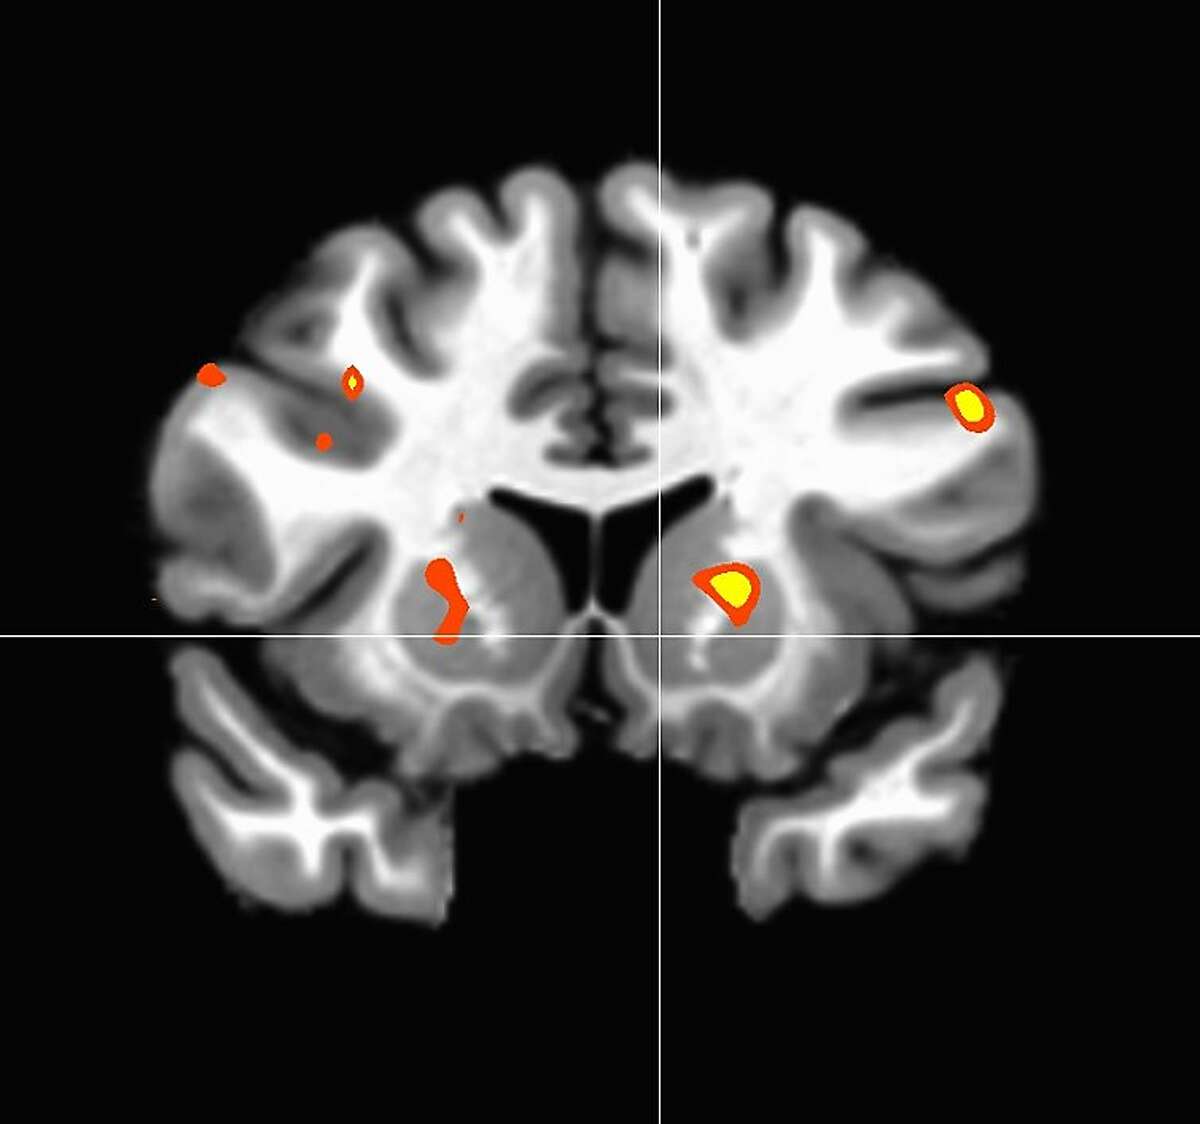 A brain scan of a monk actively extending compassion shows activity in the striatum, an area of the brain associated with reward processing.